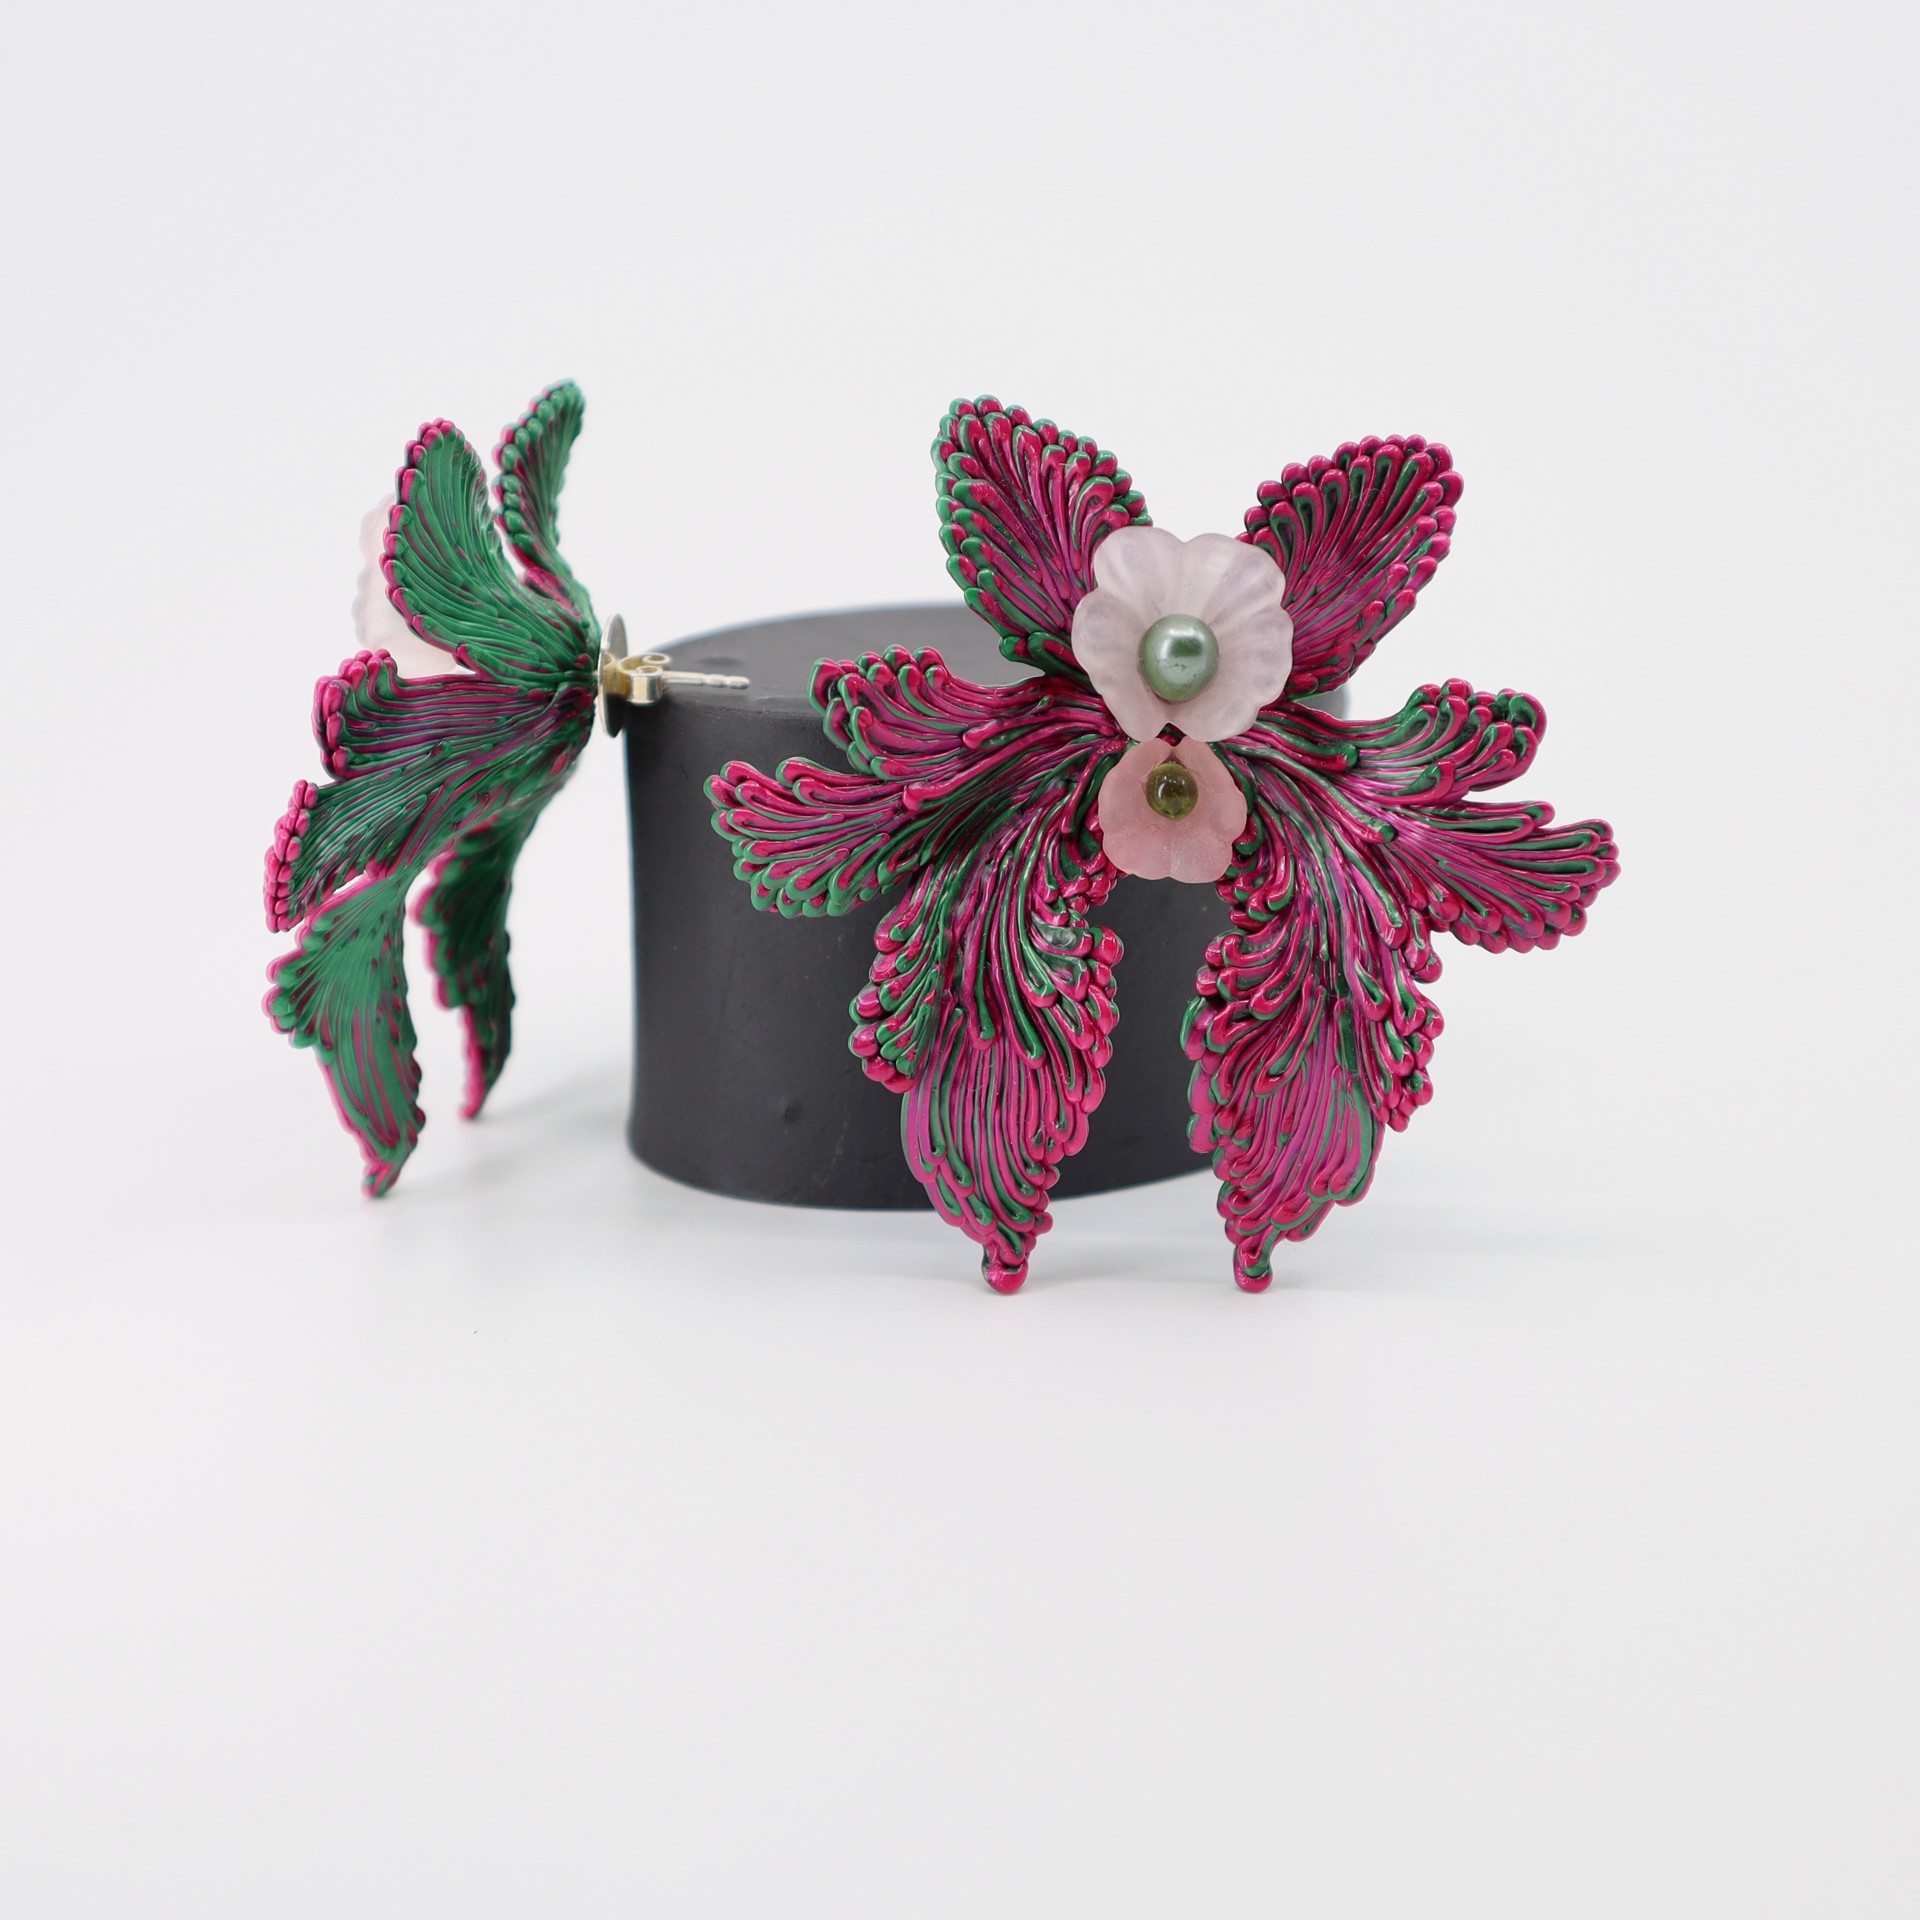 Red Swallowtail (Earrings) by Carina Shoshtary